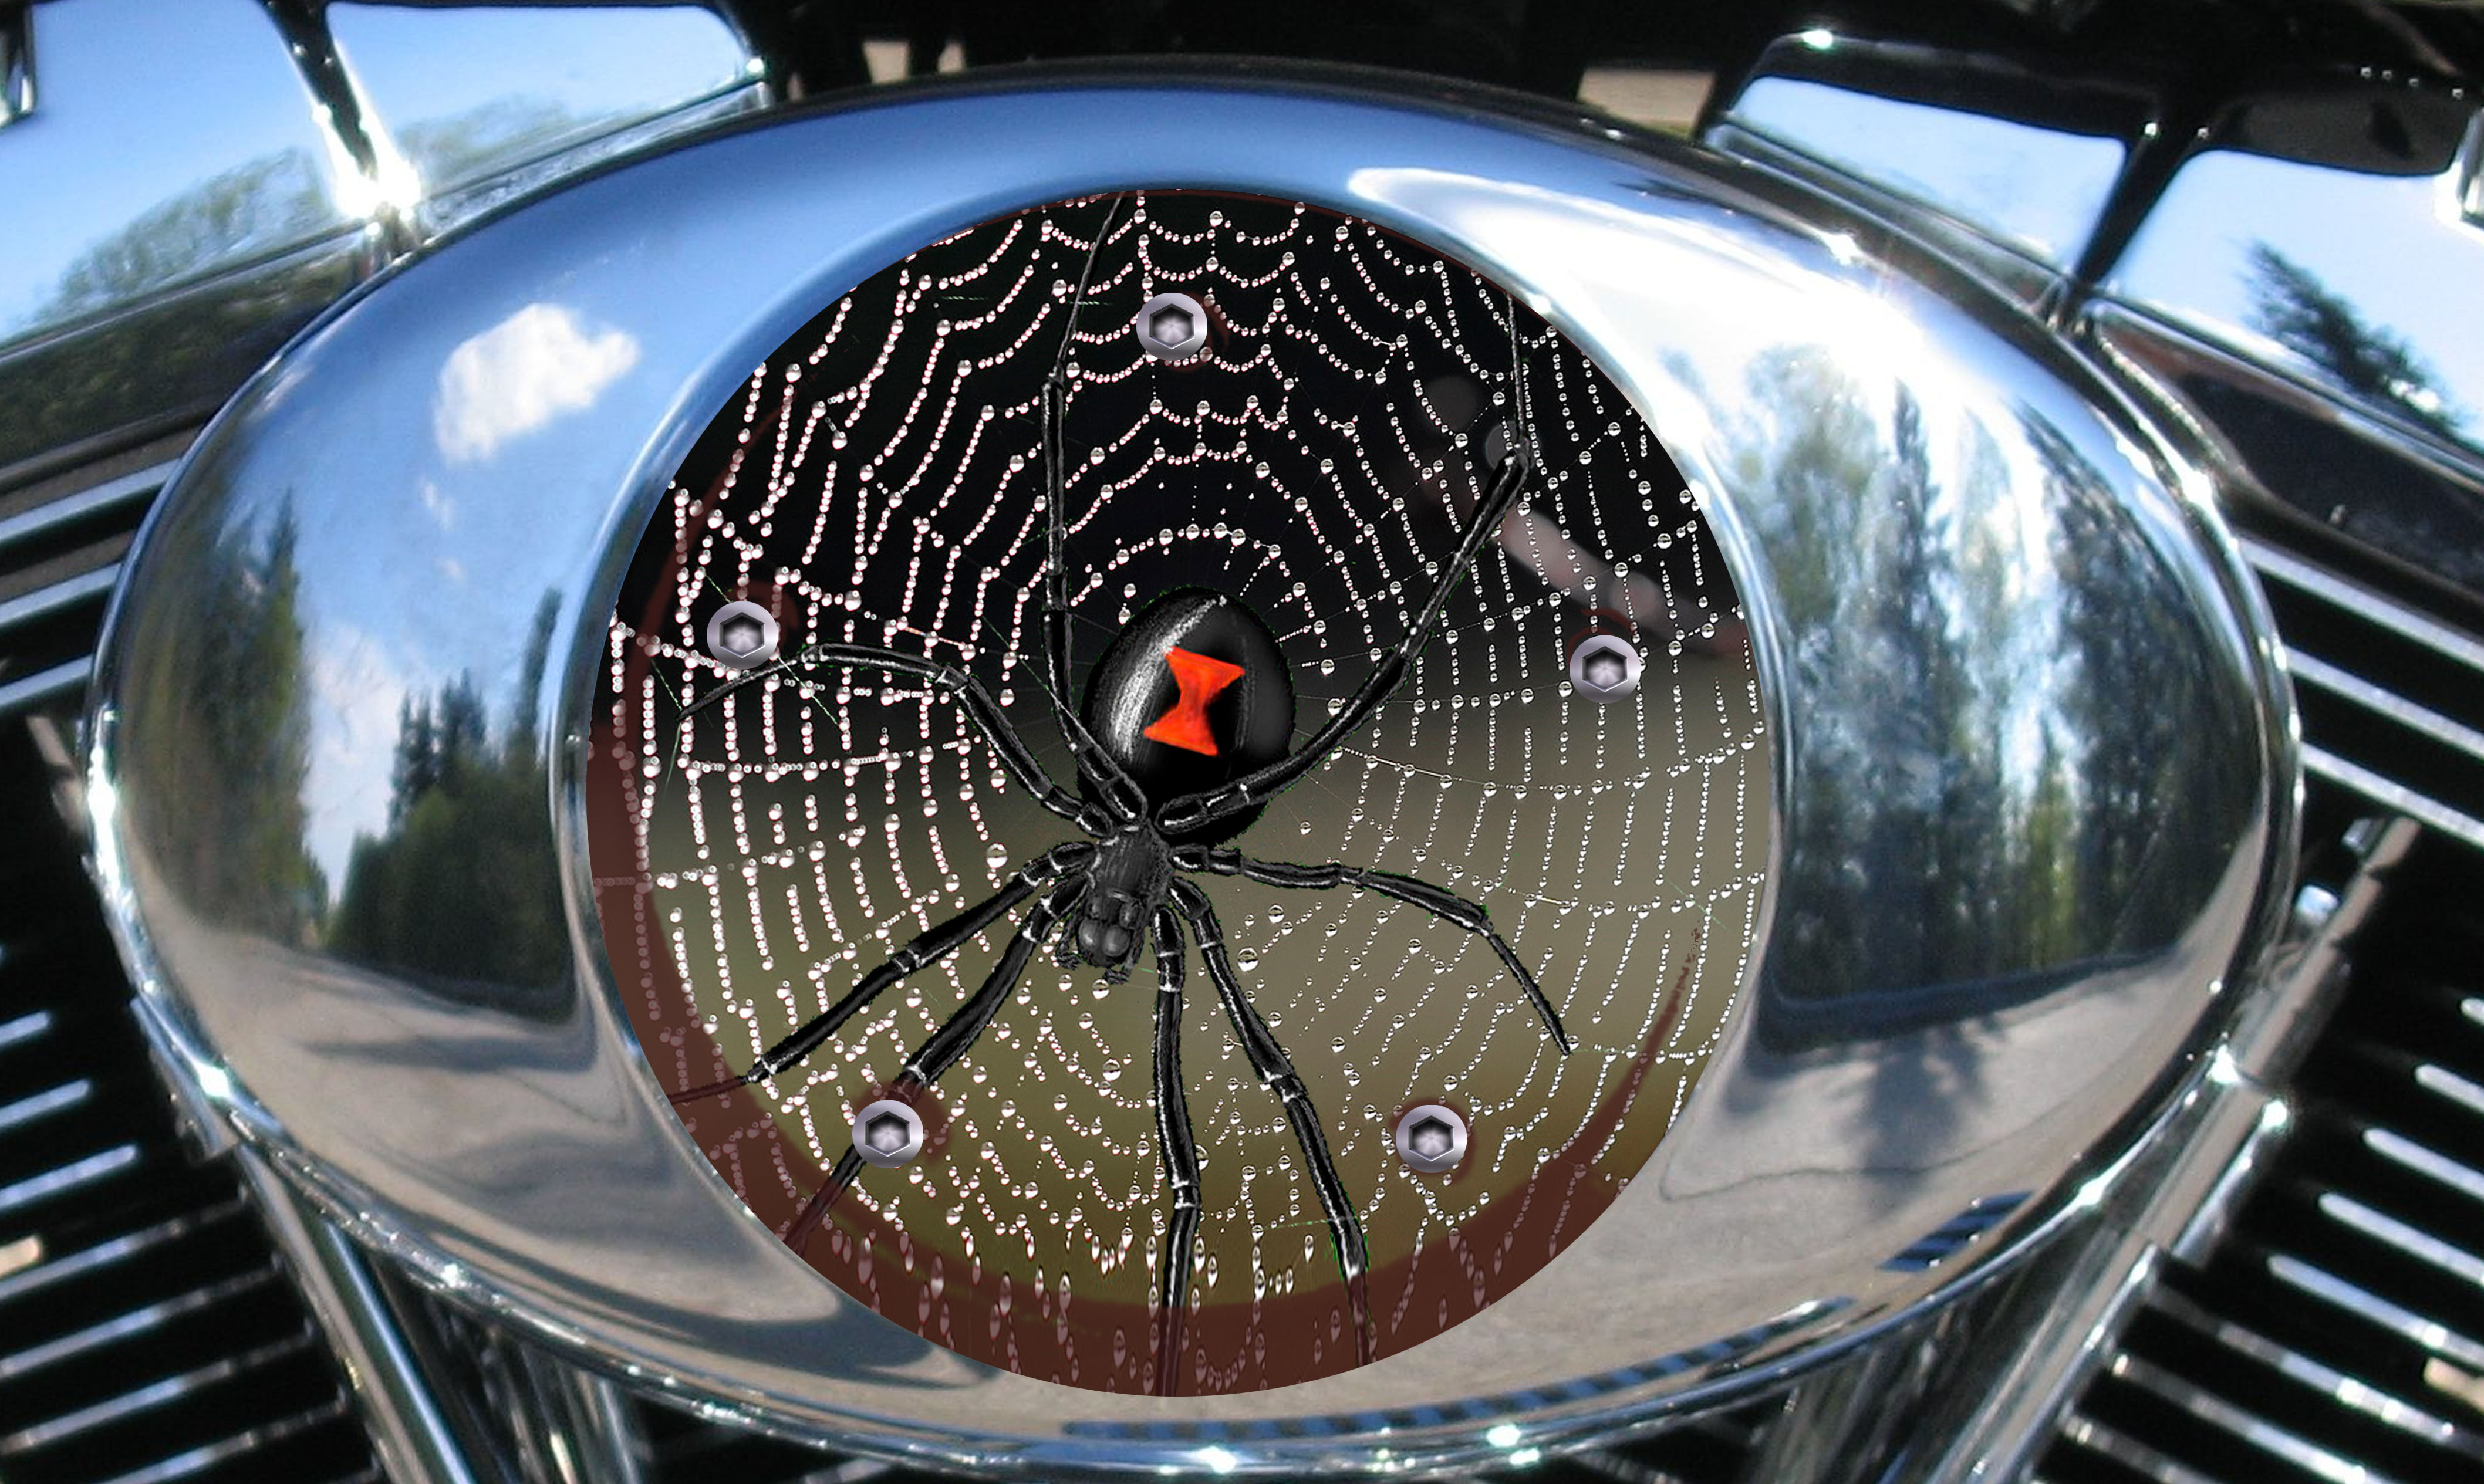 Custom Air Cleaner Cover - Spider on web w/ dew